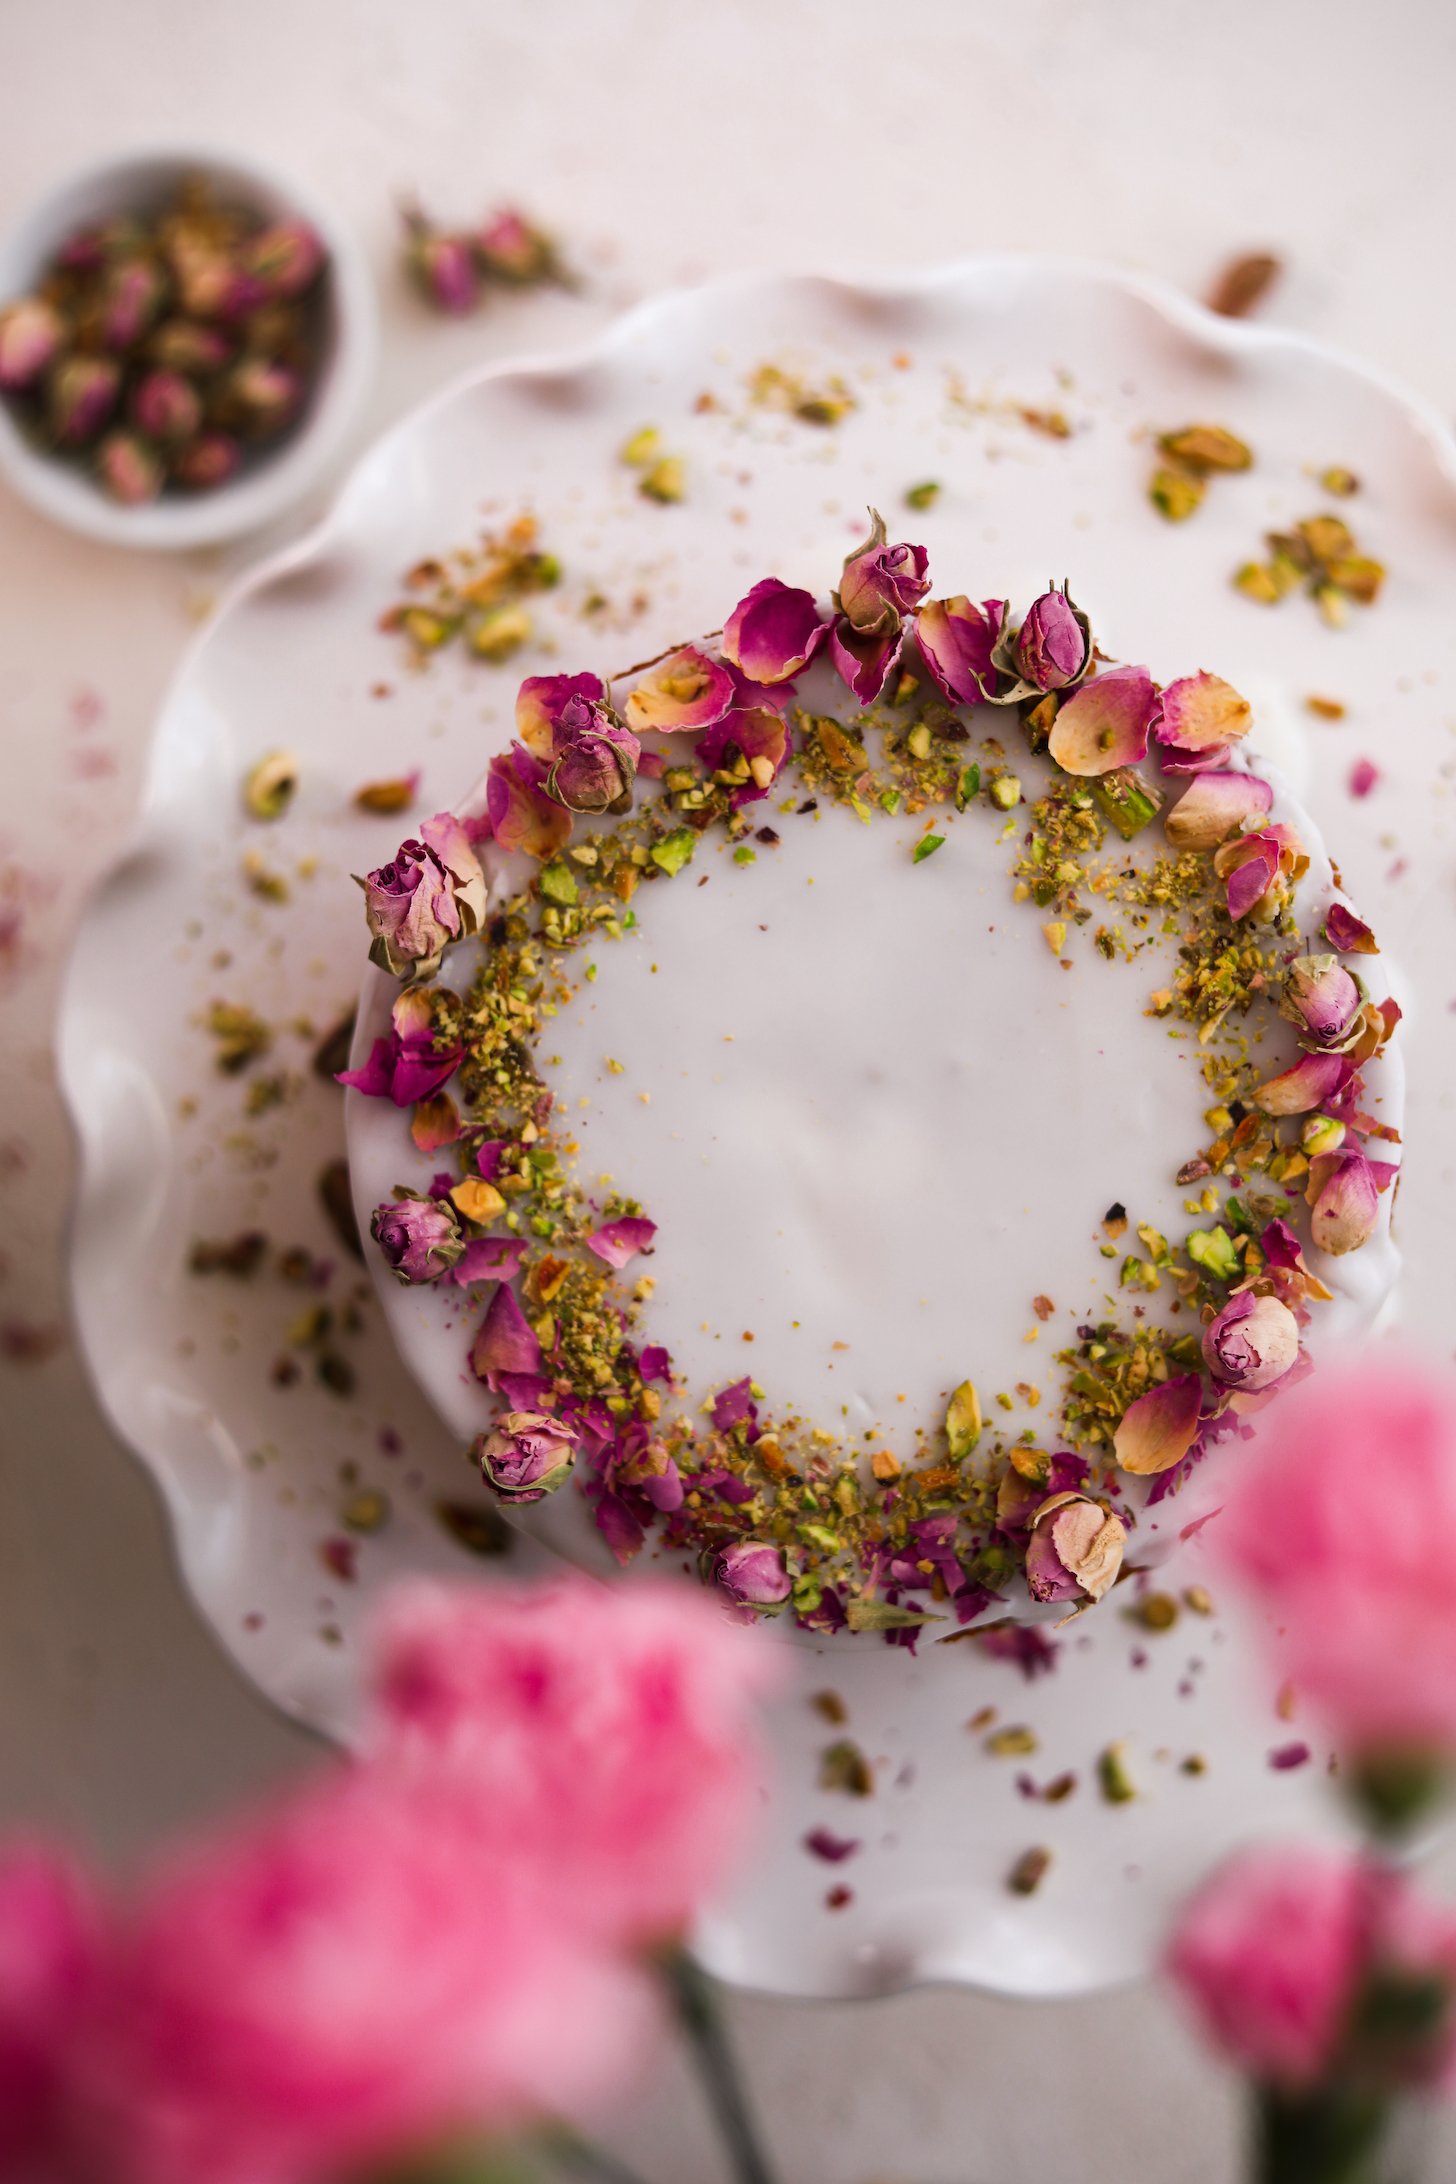 From above, a cake stand holds a cake with white icing, dried roses, and crushed pistachios. Pink flowers lean over the cake.